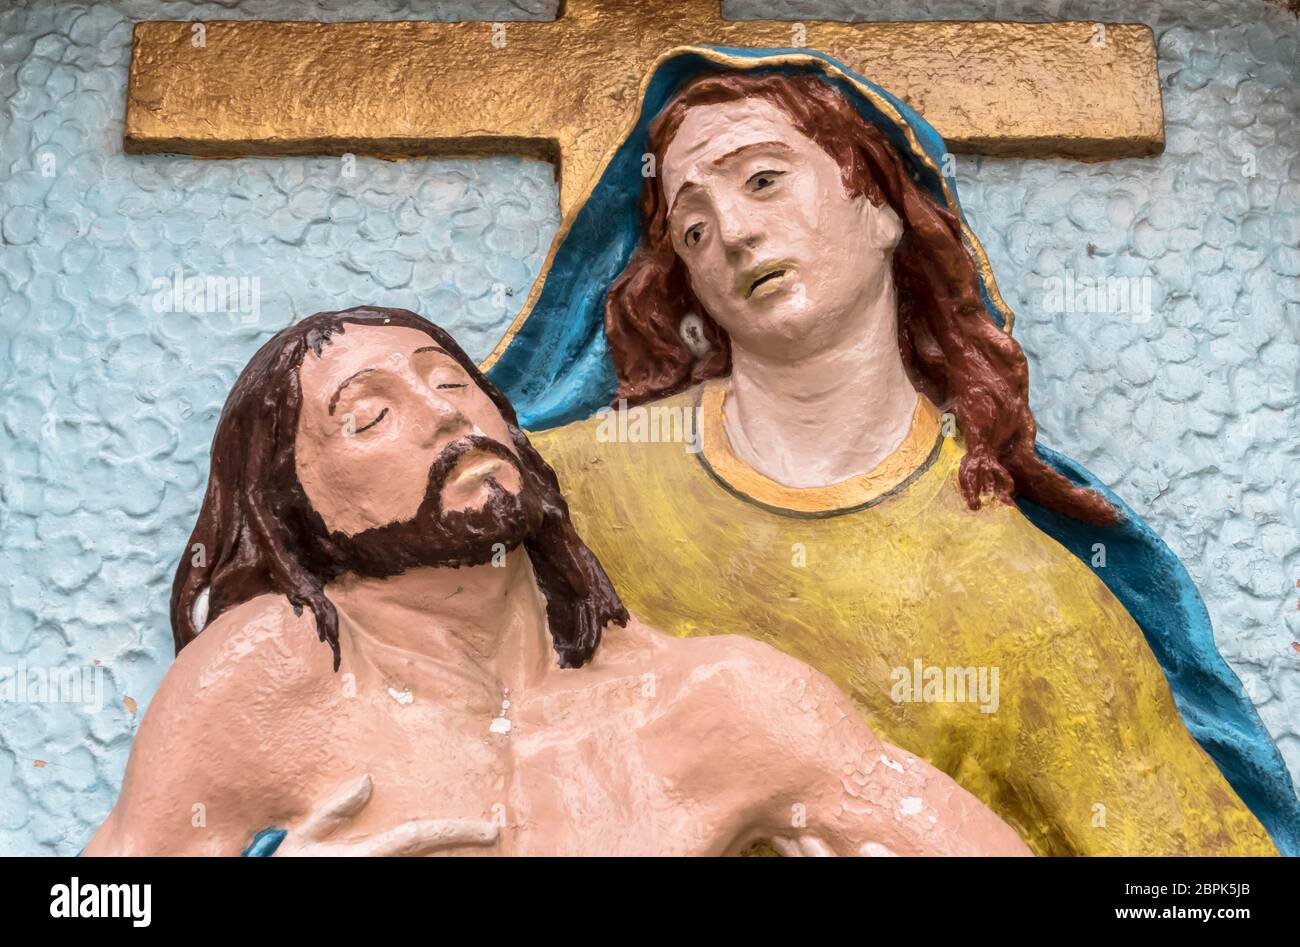 Religious stone statue in color representing The Pity of Michelangelo. Mary mother holding Jesus Christ on her lap after the Crucifixion. Stock Photo